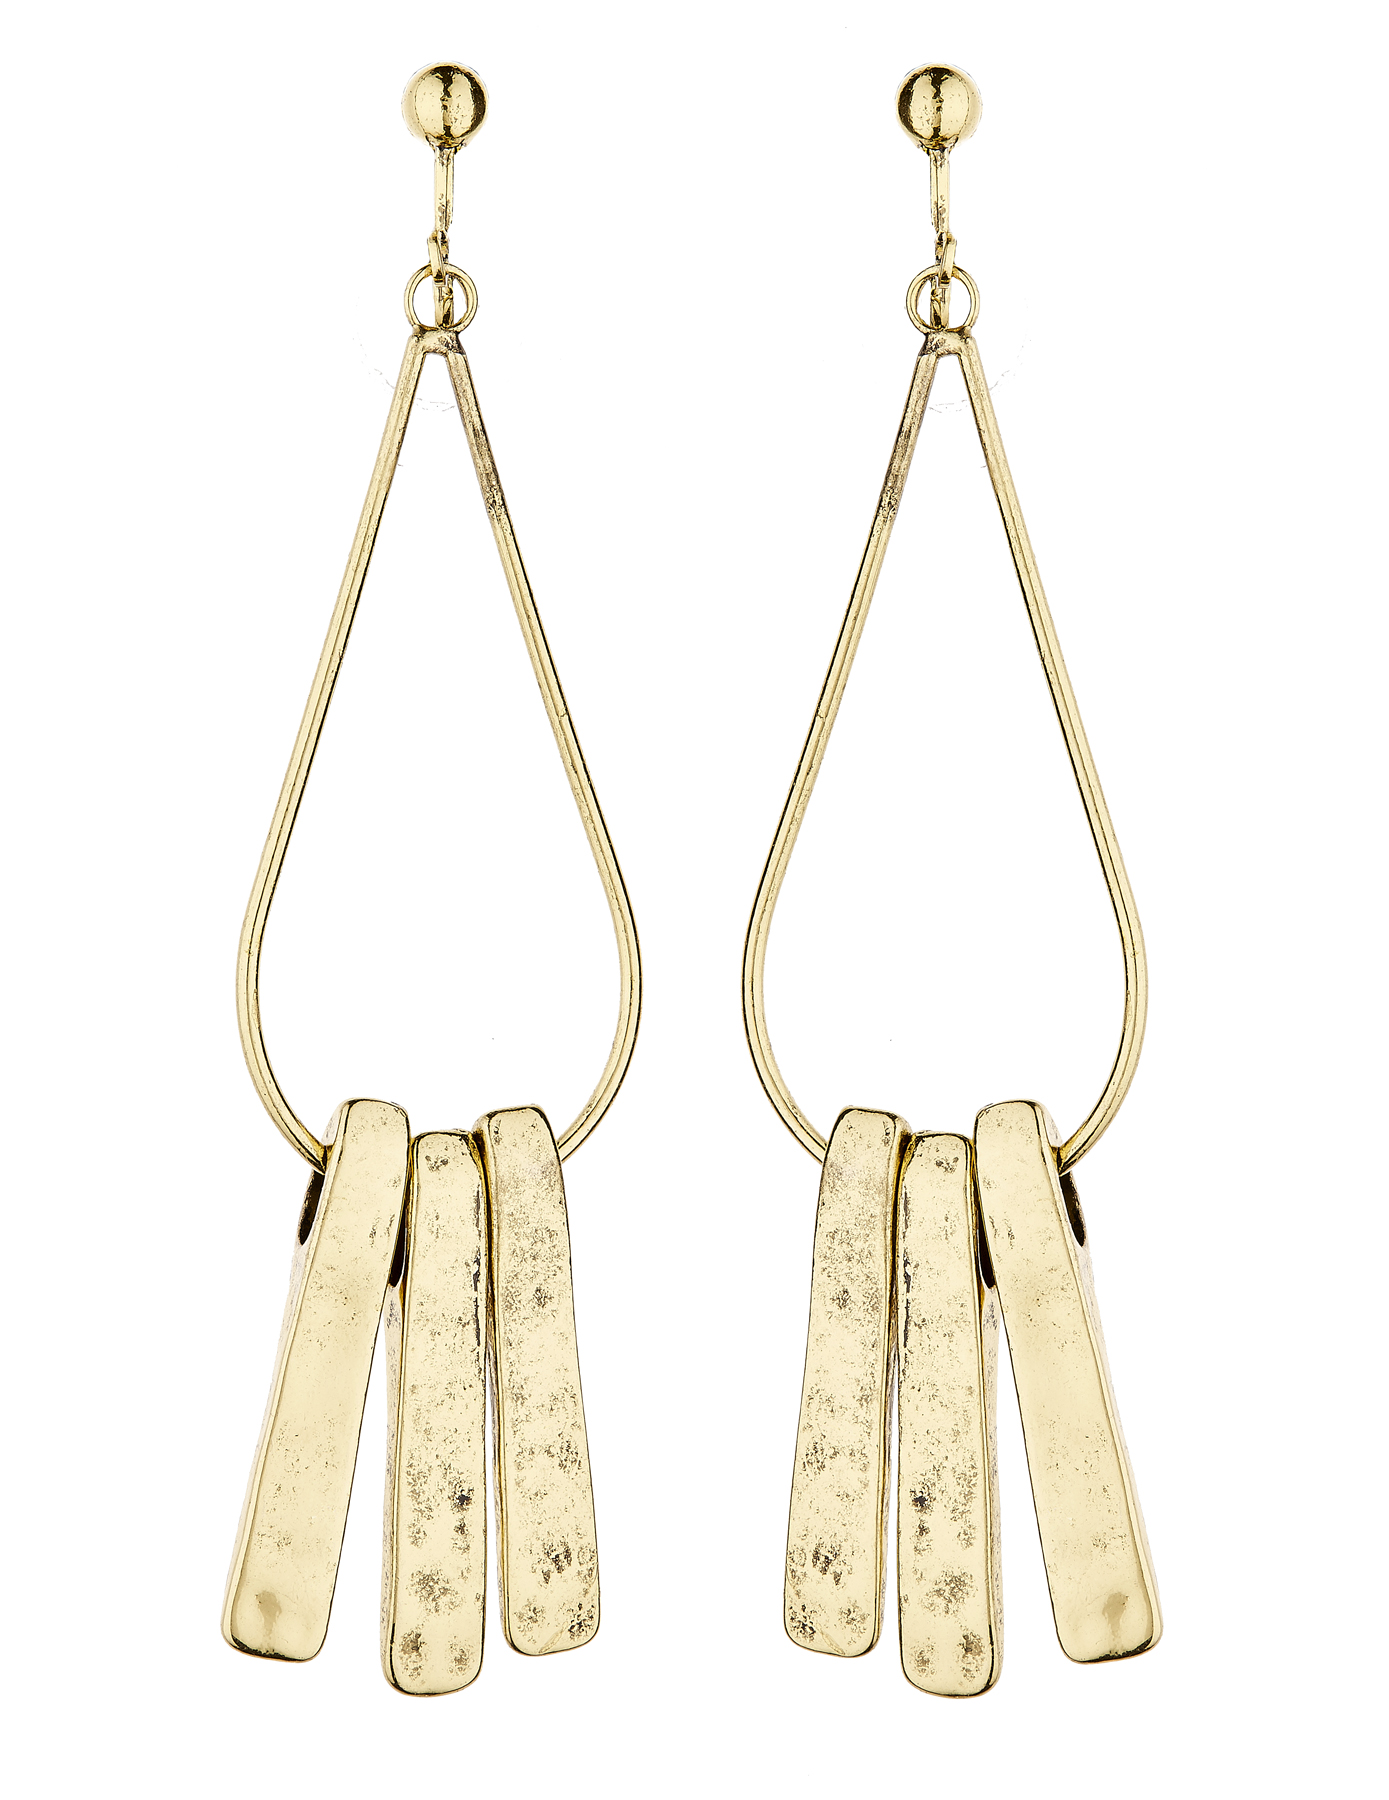 Clip On Earrings - Kaila - antique gold plated drop earring with three bars